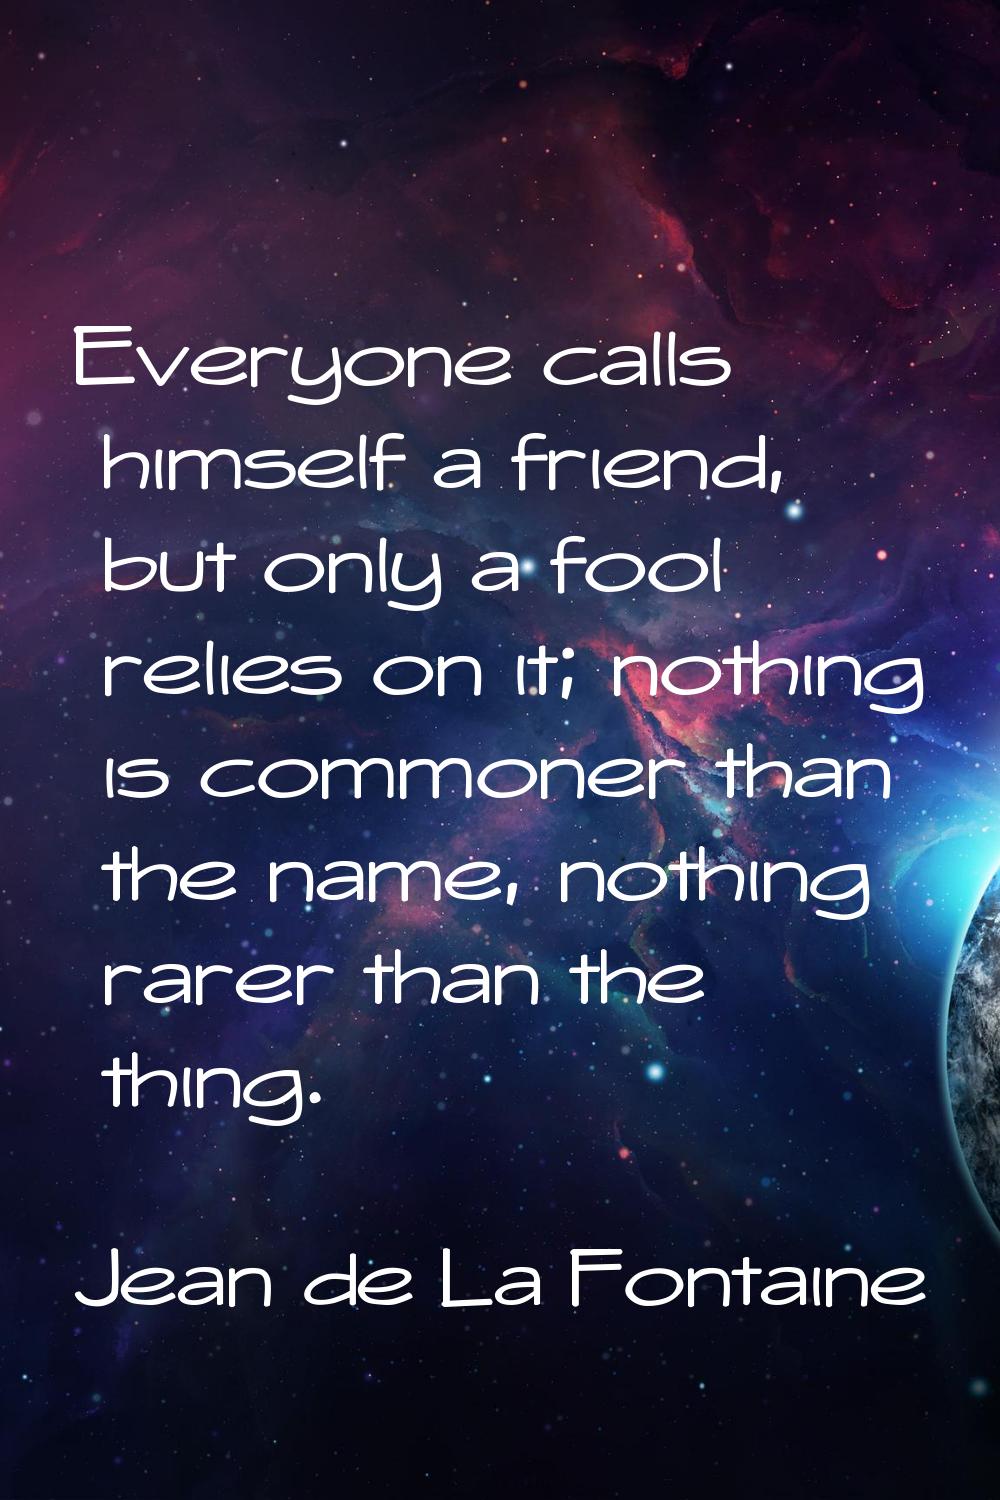 Everyone calls himself a friend, but only a fool relies on it; nothing is commoner than the name, n